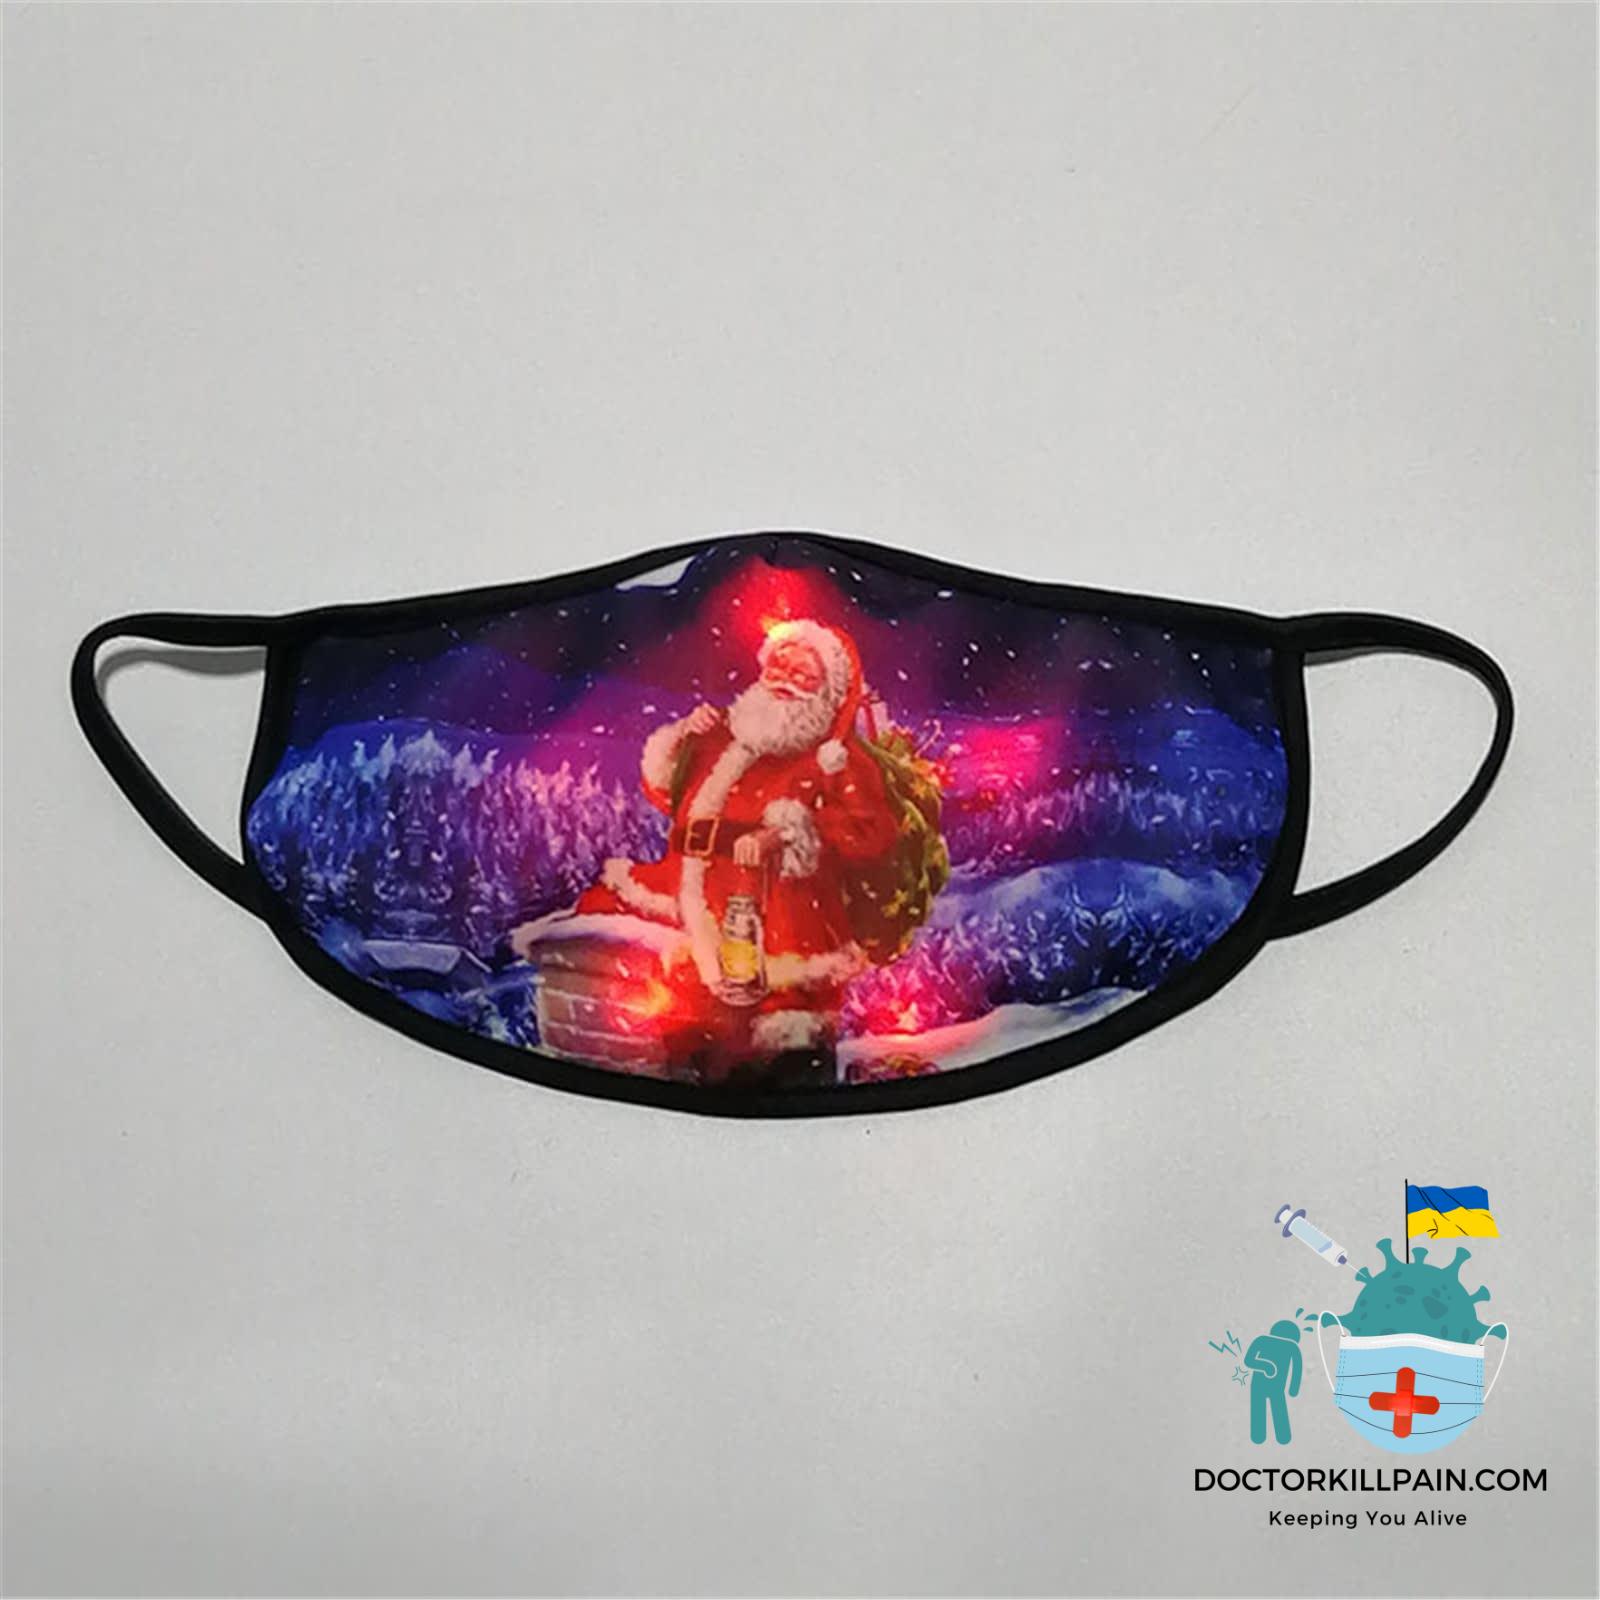 Christmas face Mask. Led Light Up Mask Glowing Christmas Mask Luminous Dust Mask Color Lights Party Rave Mask For Christmas Masquerade Men And Women